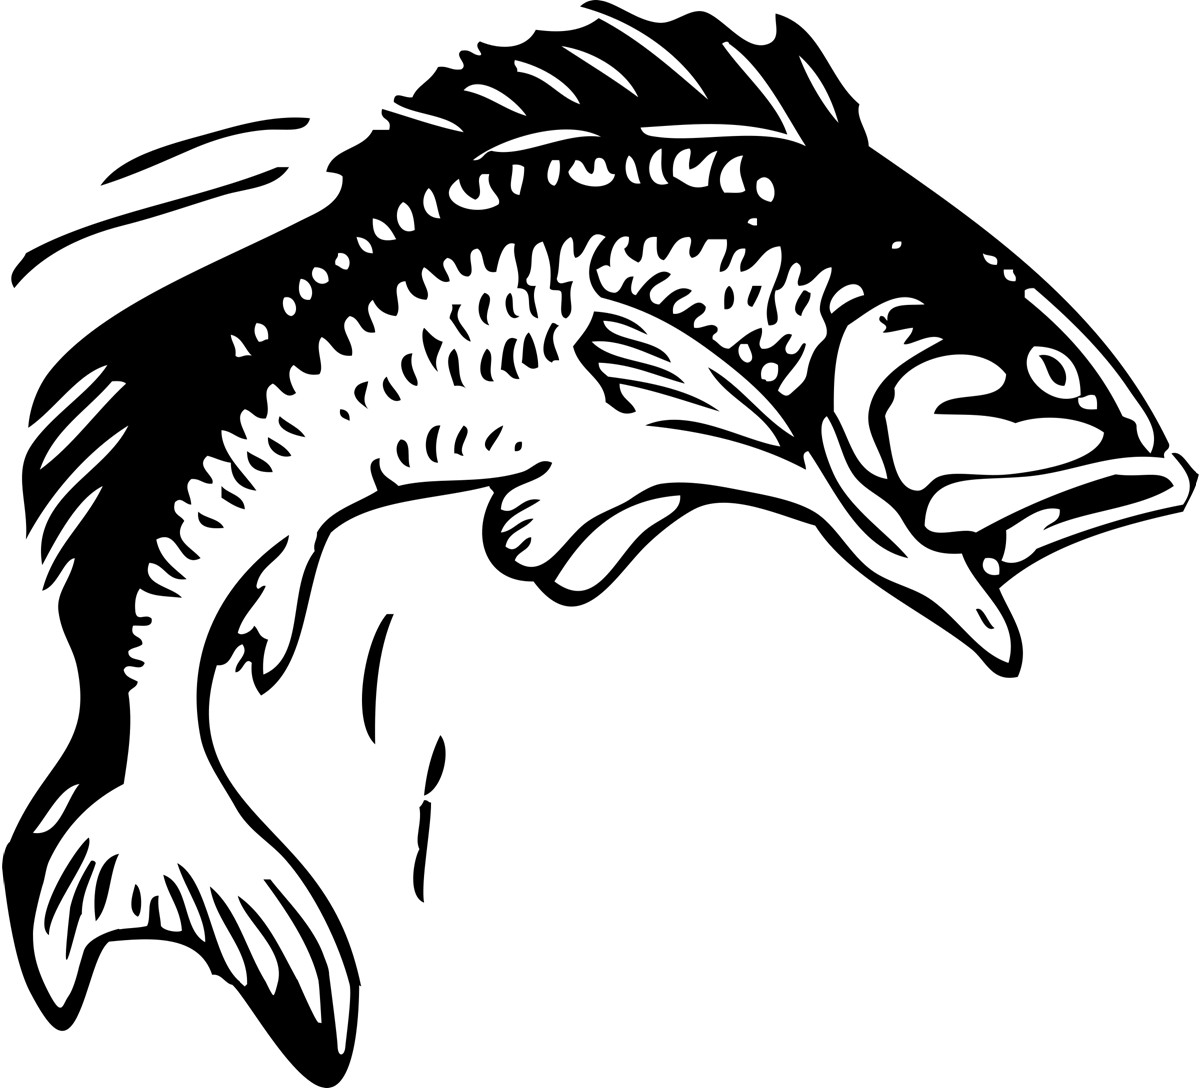 Fisherman Fishing Of The Worker Illpop Clipart